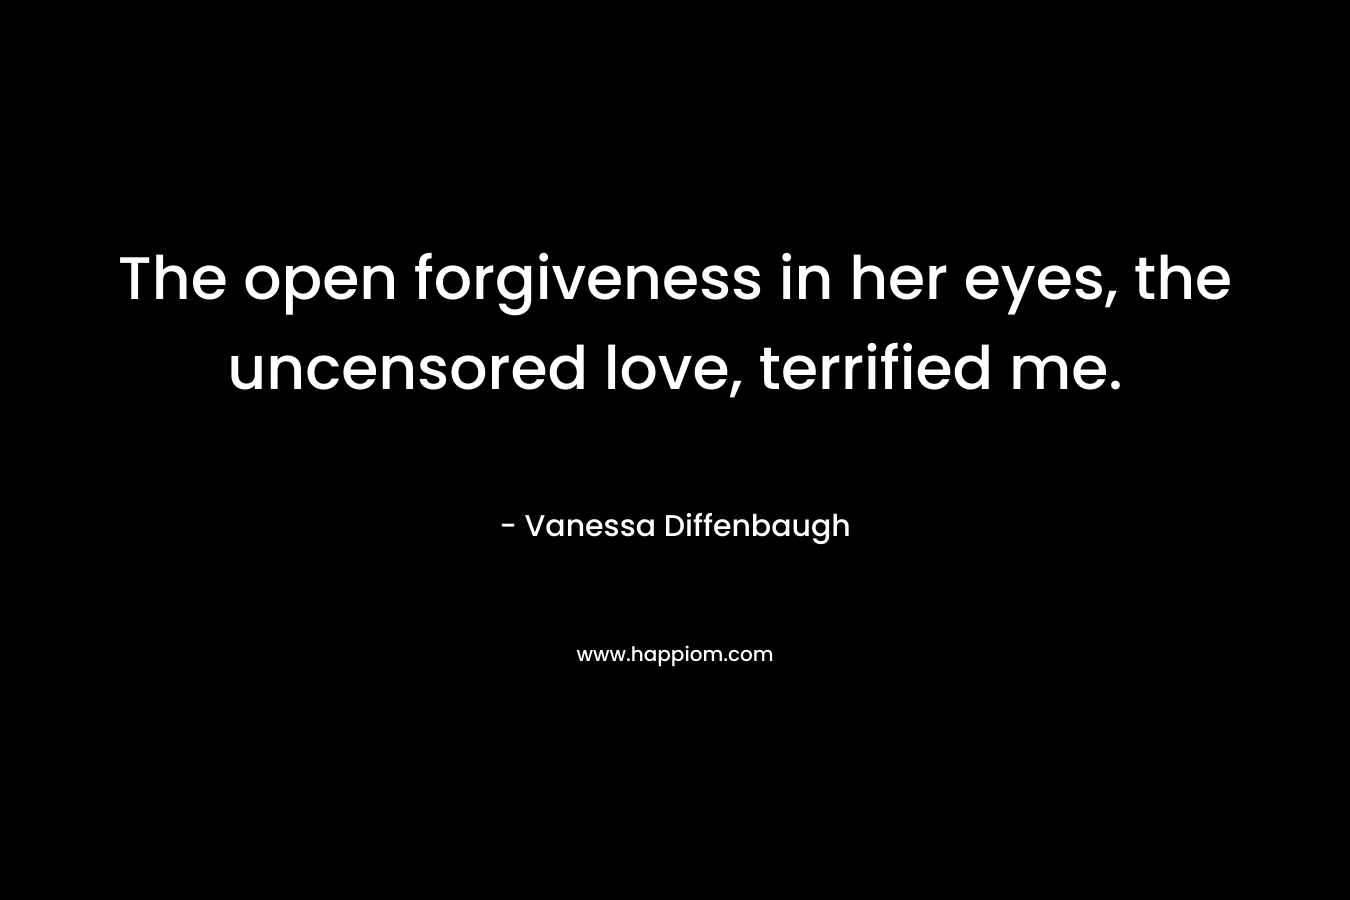 The open forgiveness in her eyes, the uncensored love, terrified me. – Vanessa Diffenbaugh